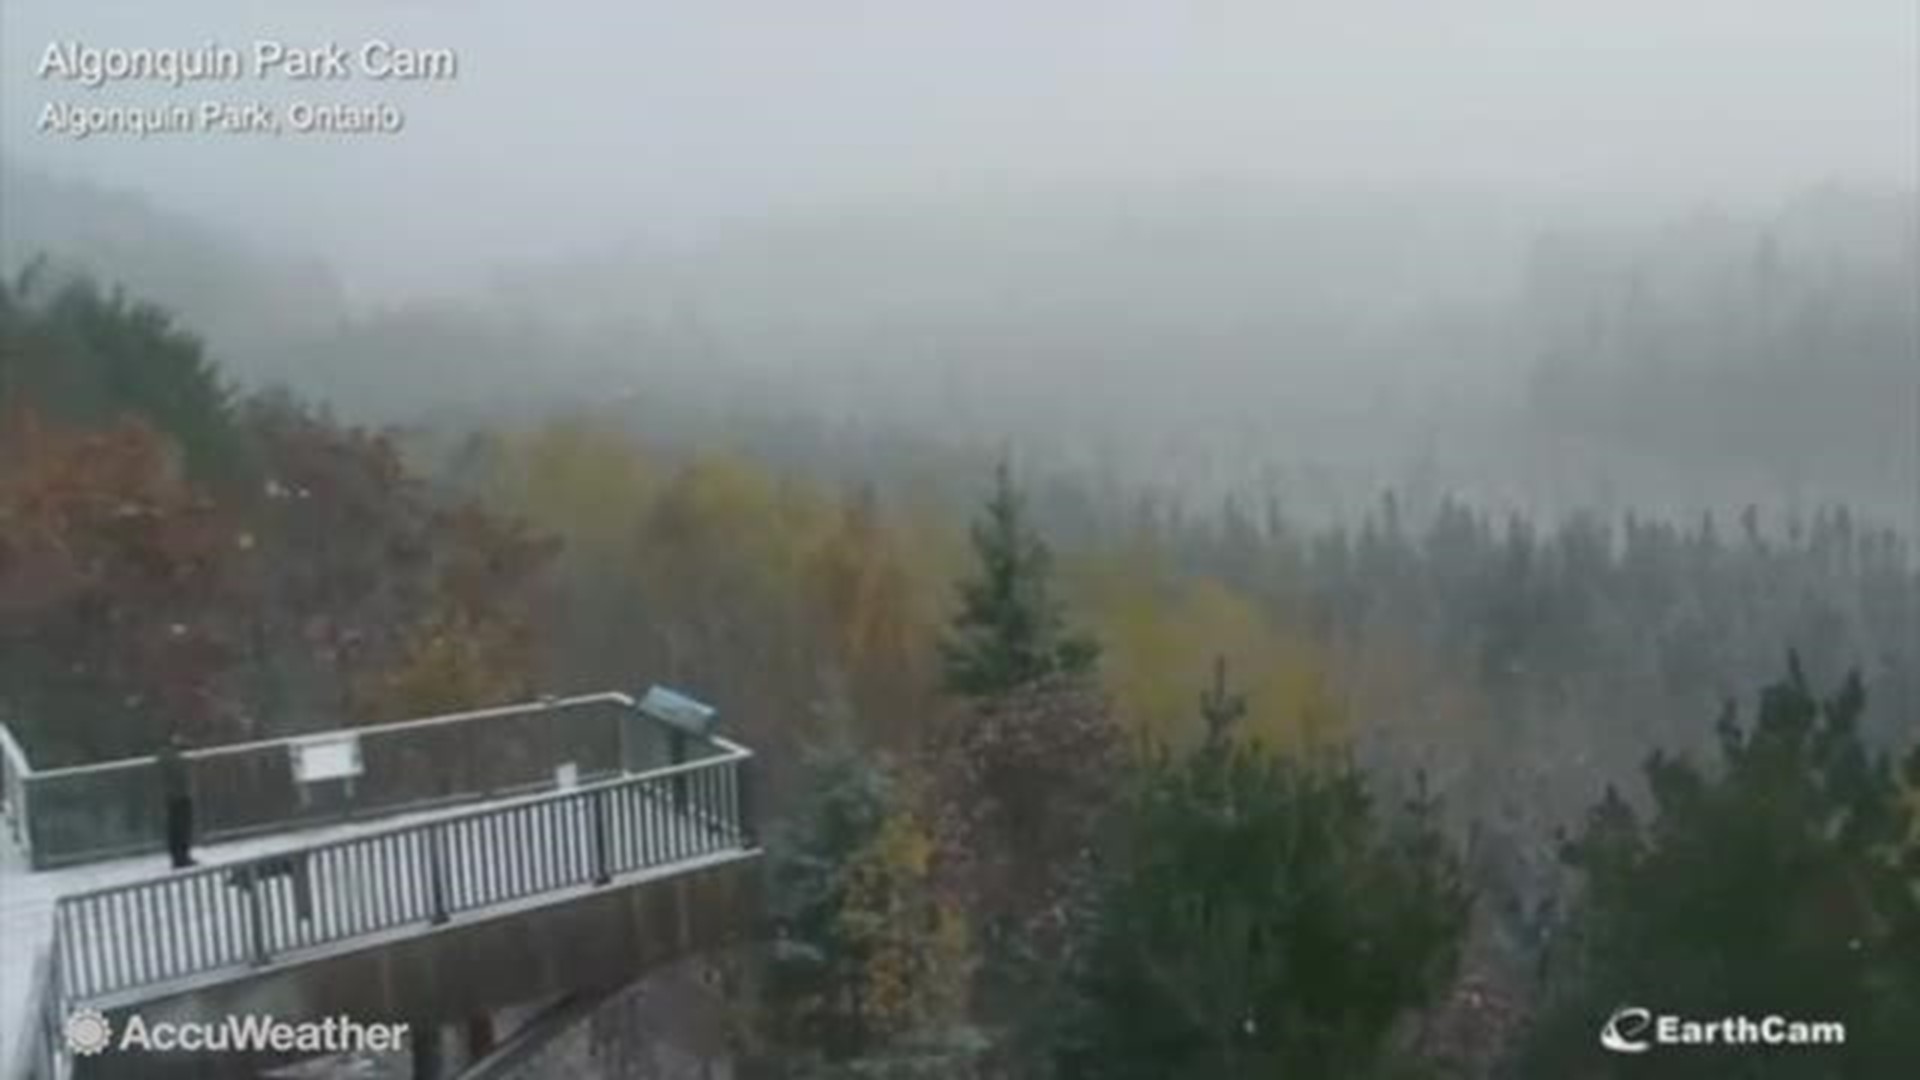 Canada's Algonquin Park had a spectacular sight of snow falling on the fall foliage on October 18.